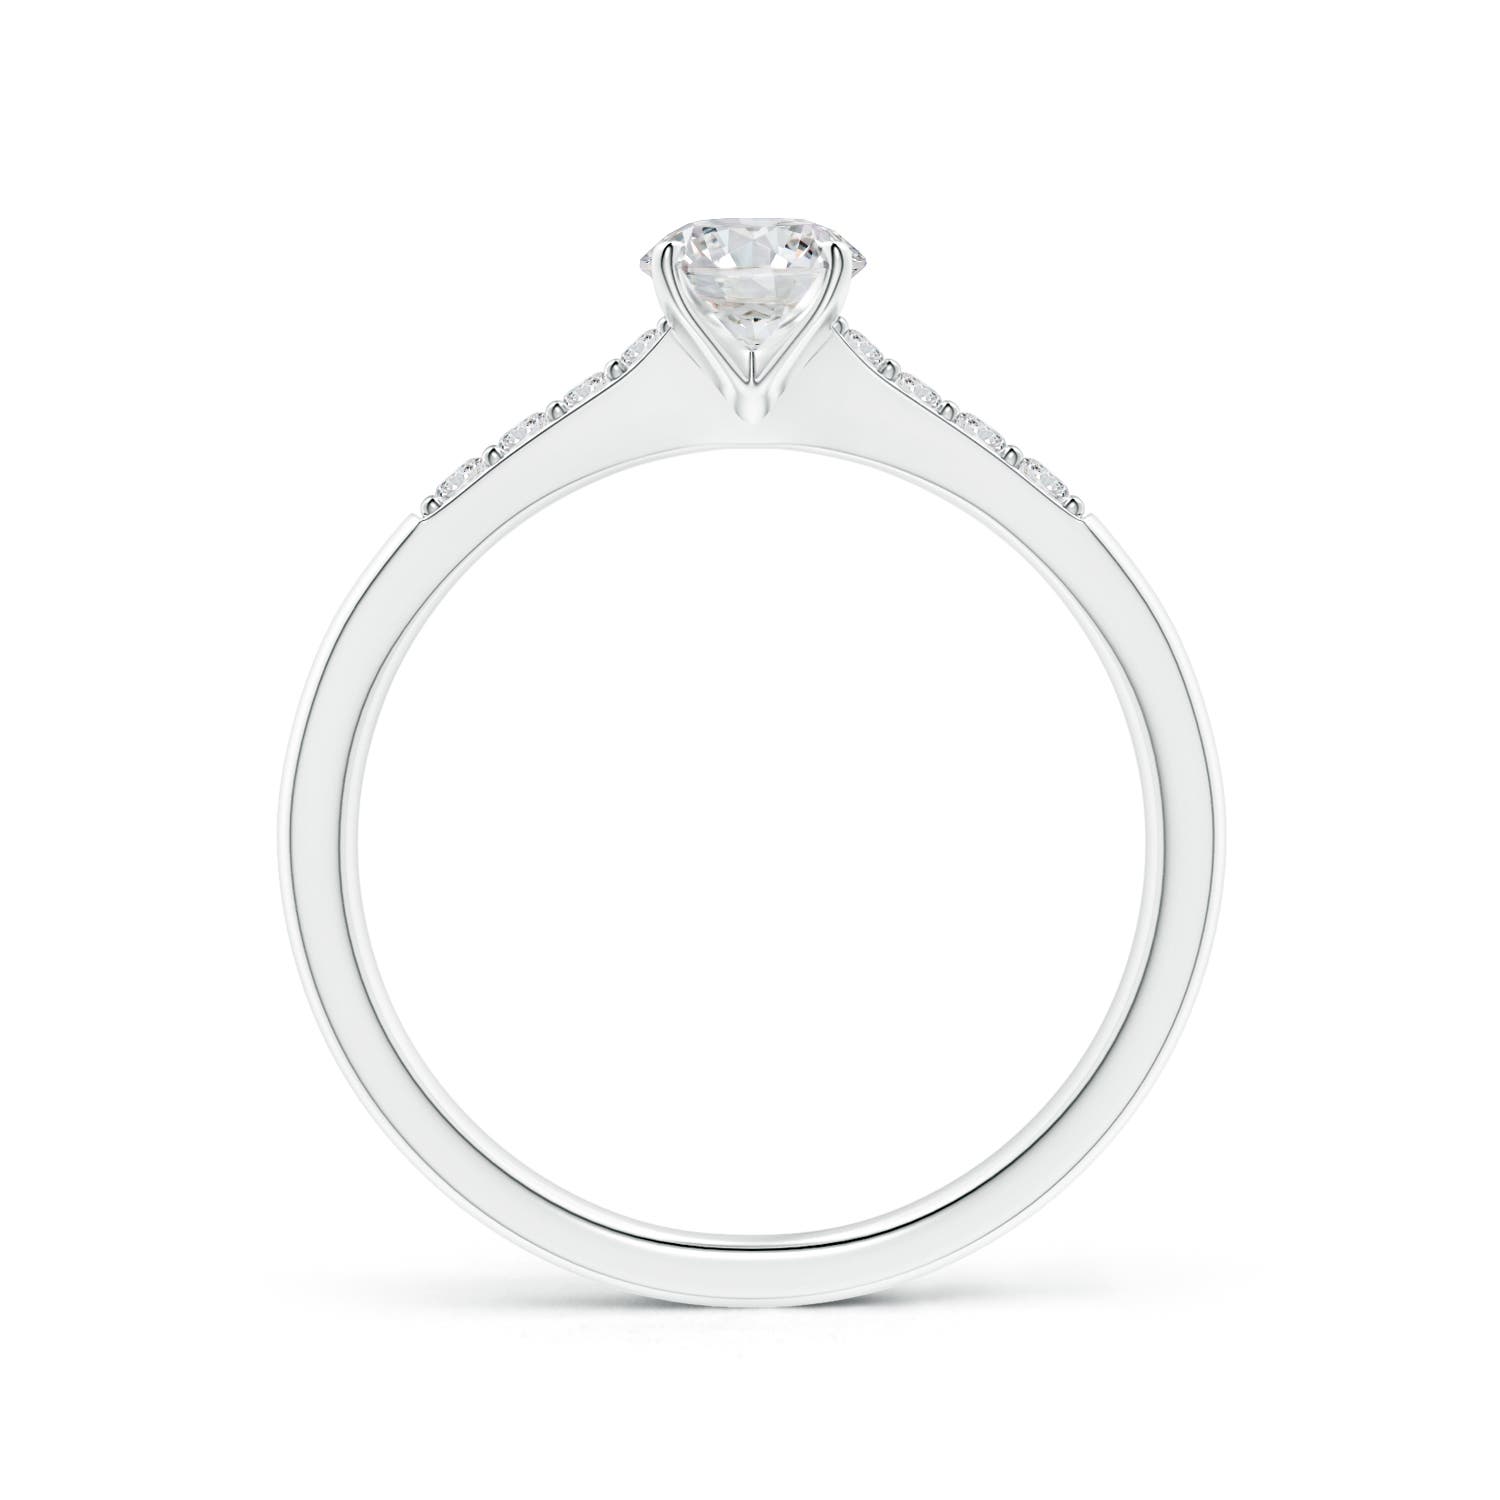 H, SI2 / 0.52 CT / 14 KT White Gold